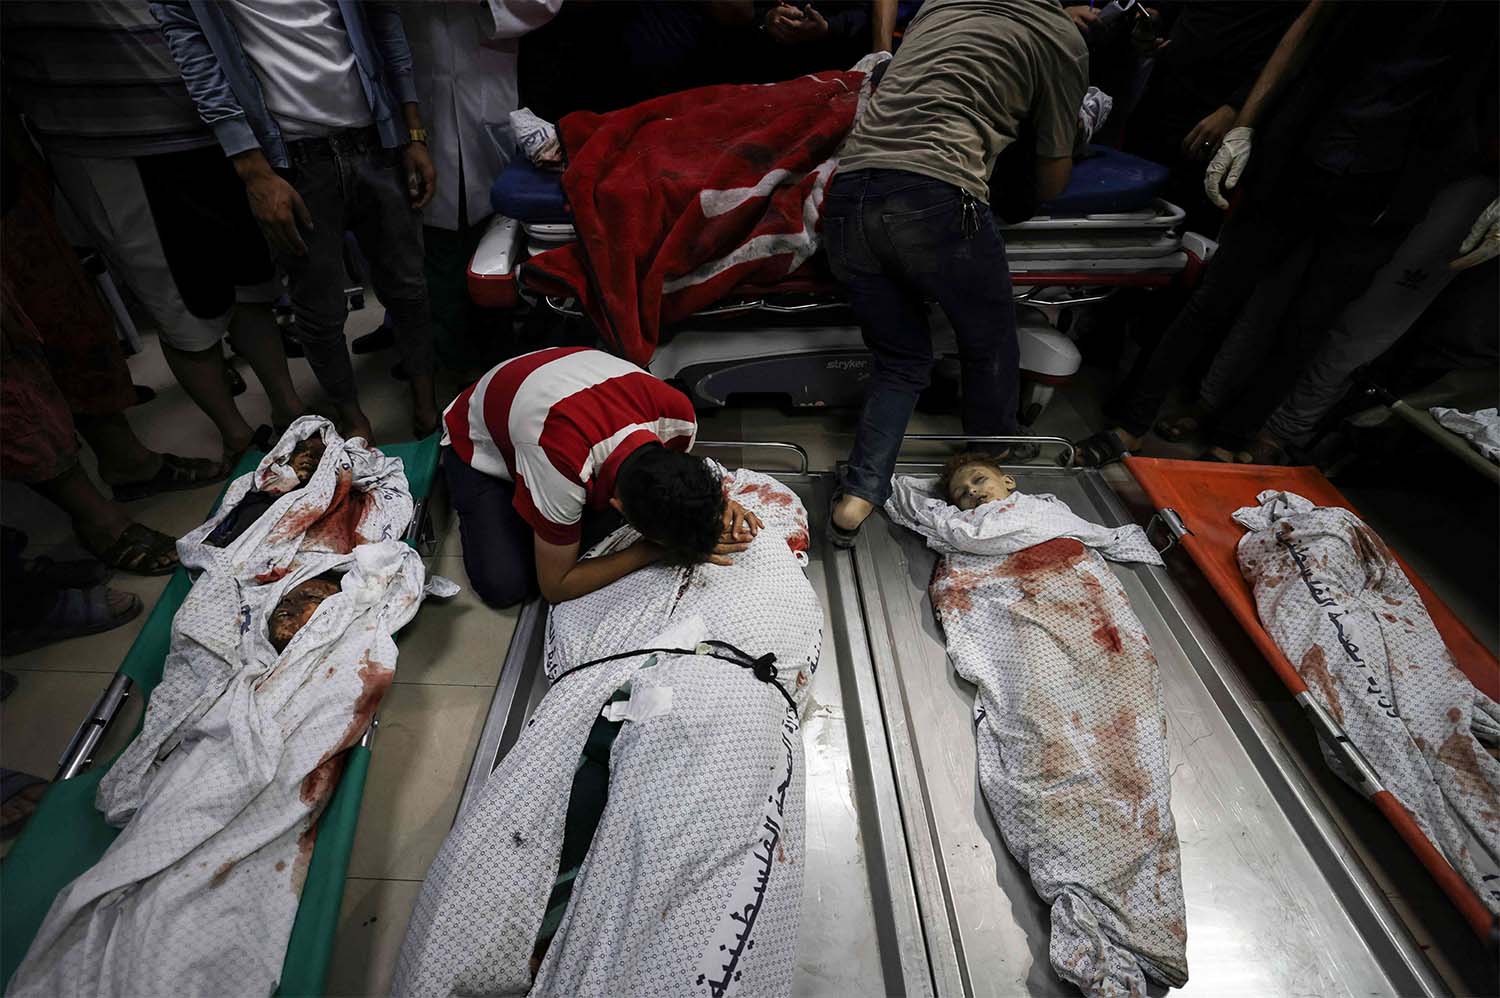 At least 126 people have been killed, including 31 children and 20 women, in Gaza